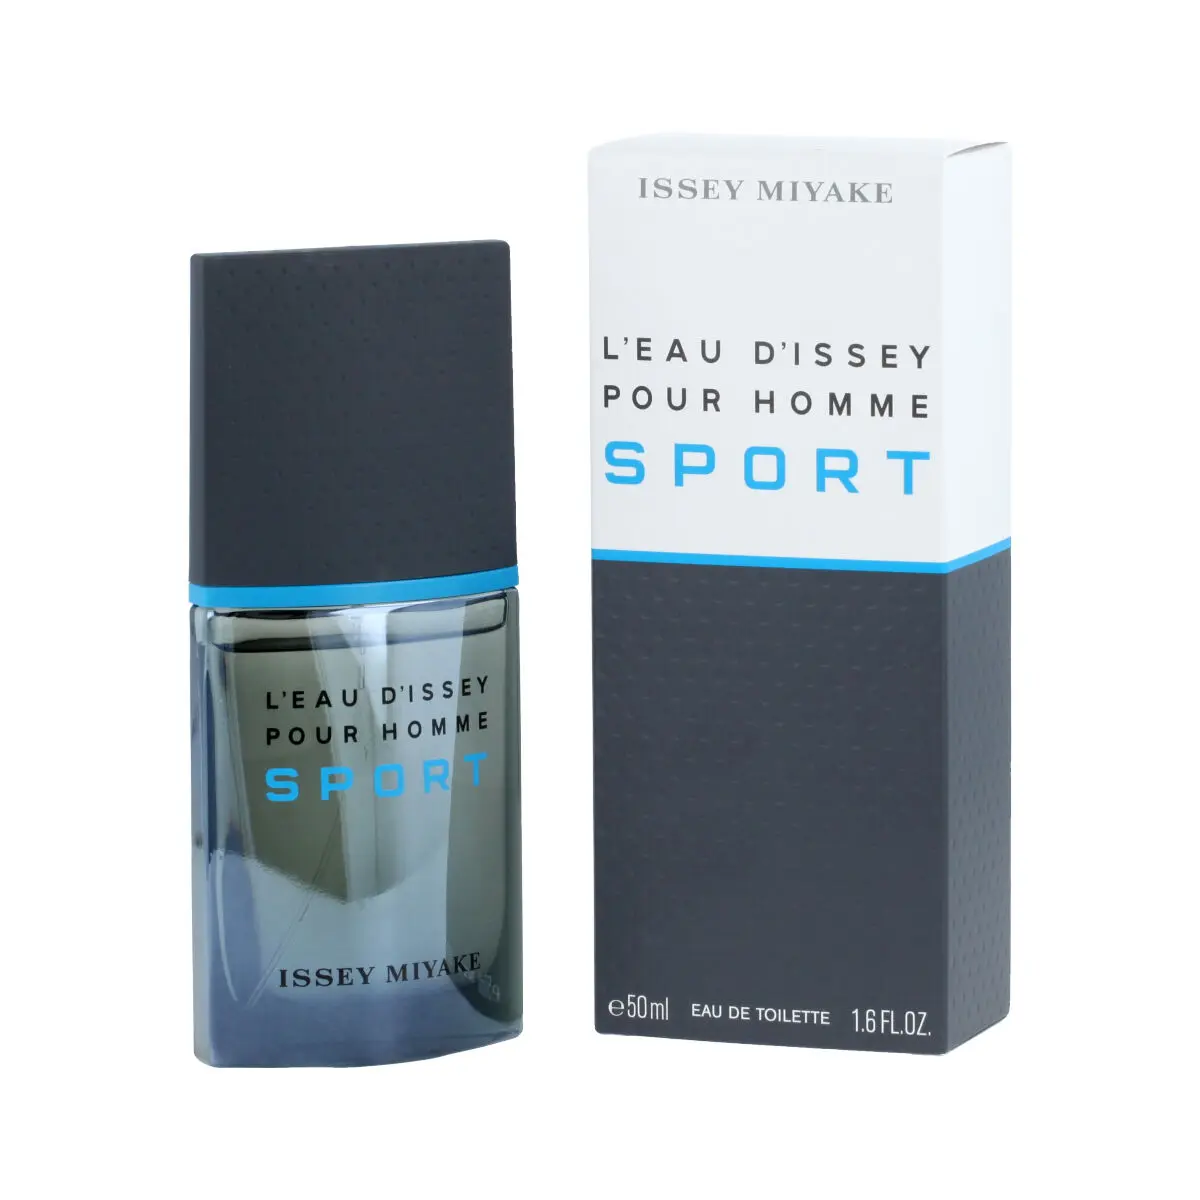 Profumo Uomo Issey Miyake EDT L'eau D'issey Pour Homme Sport 50 ml